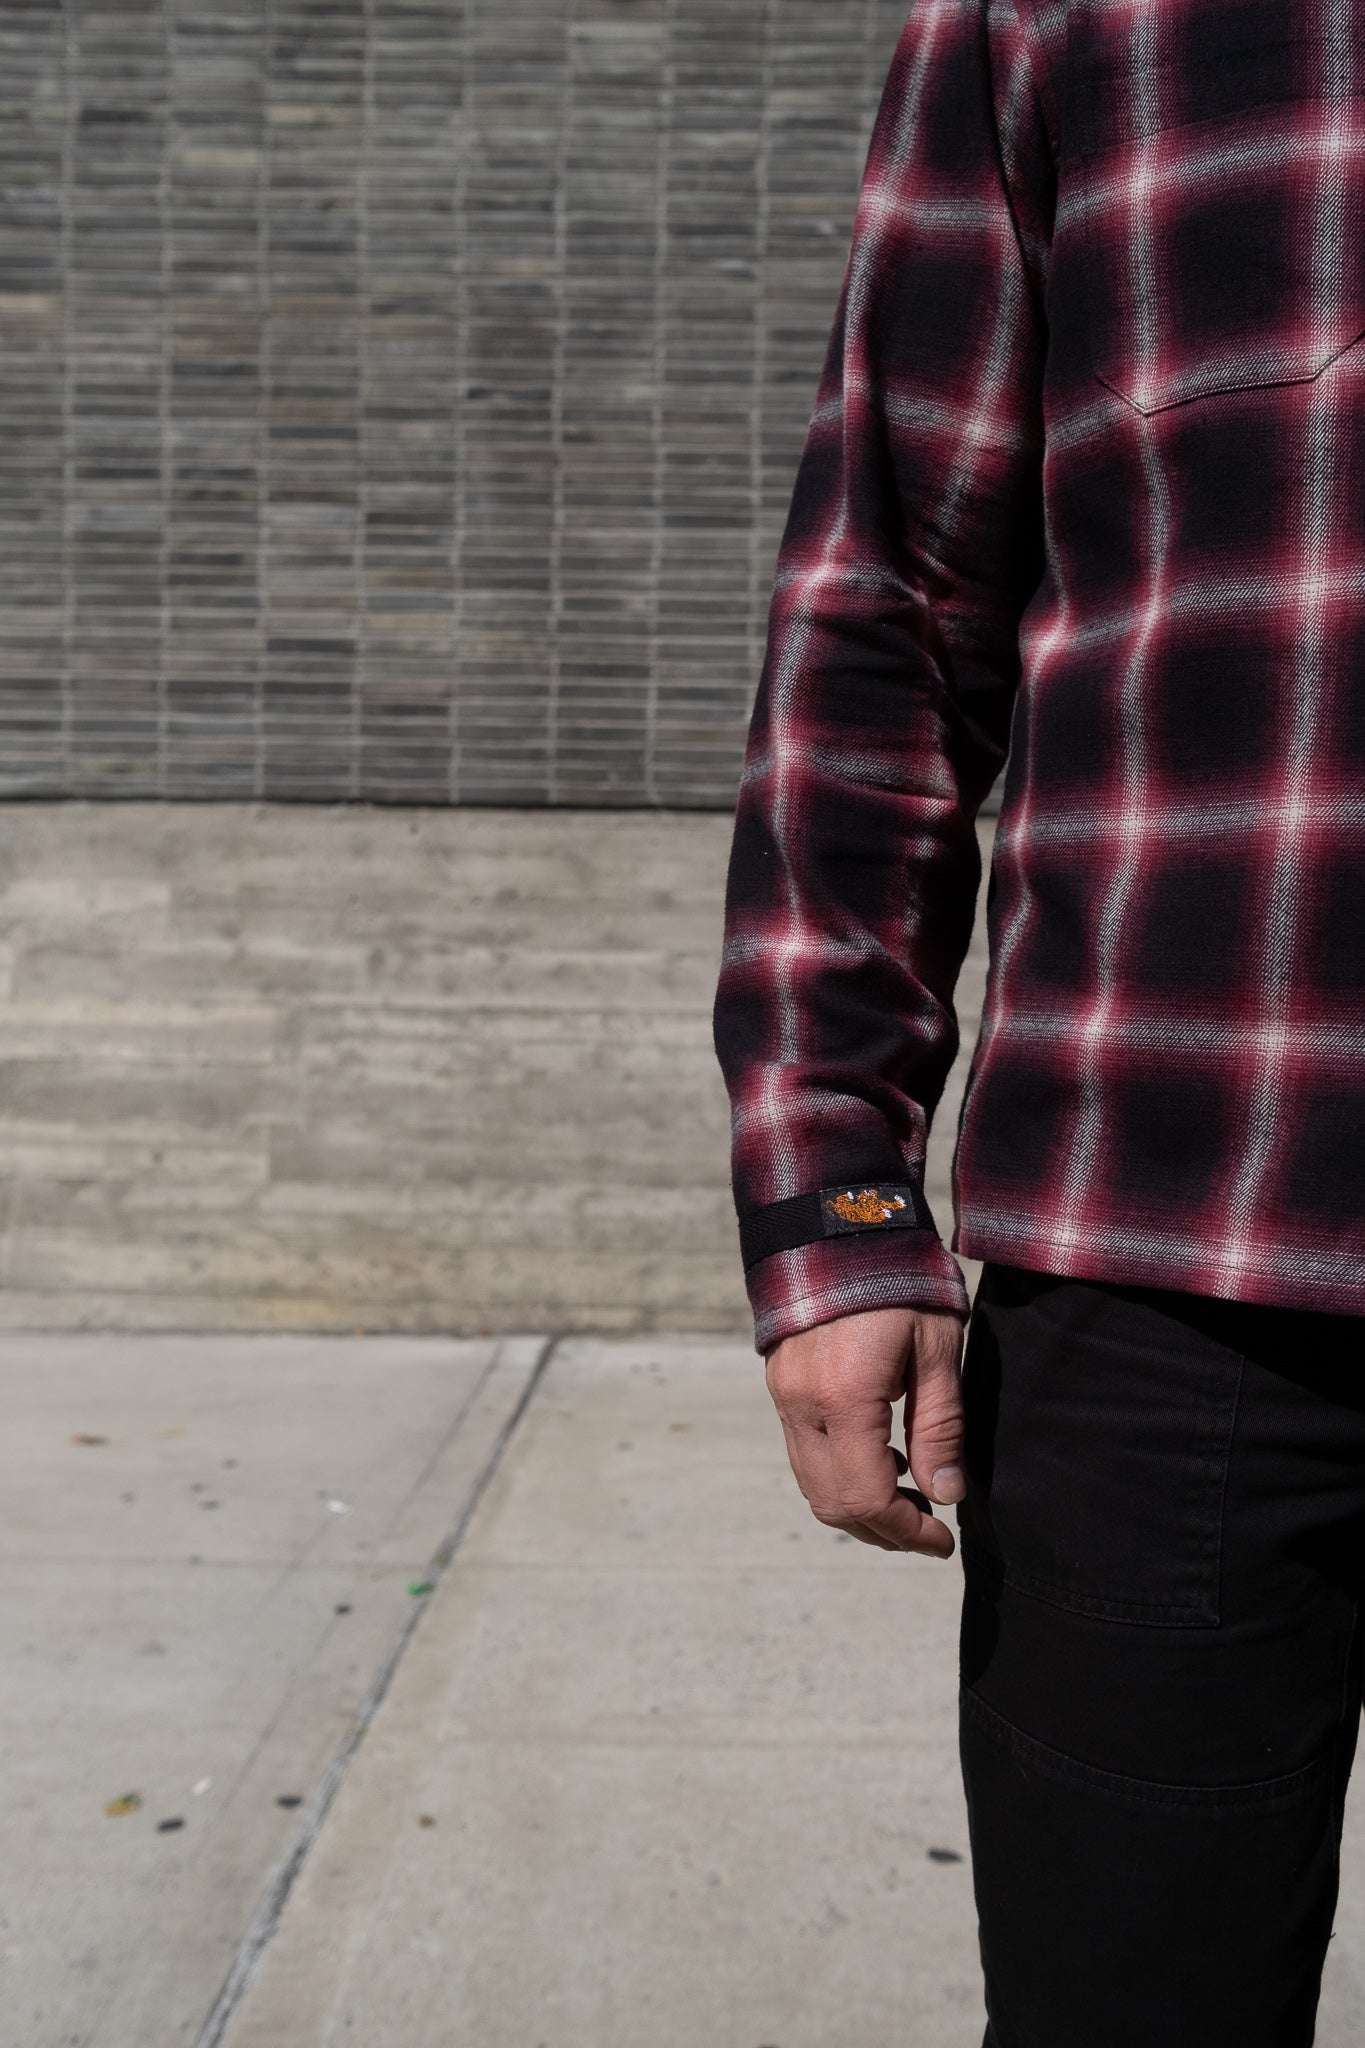 Flannel Smock - Red Plaid